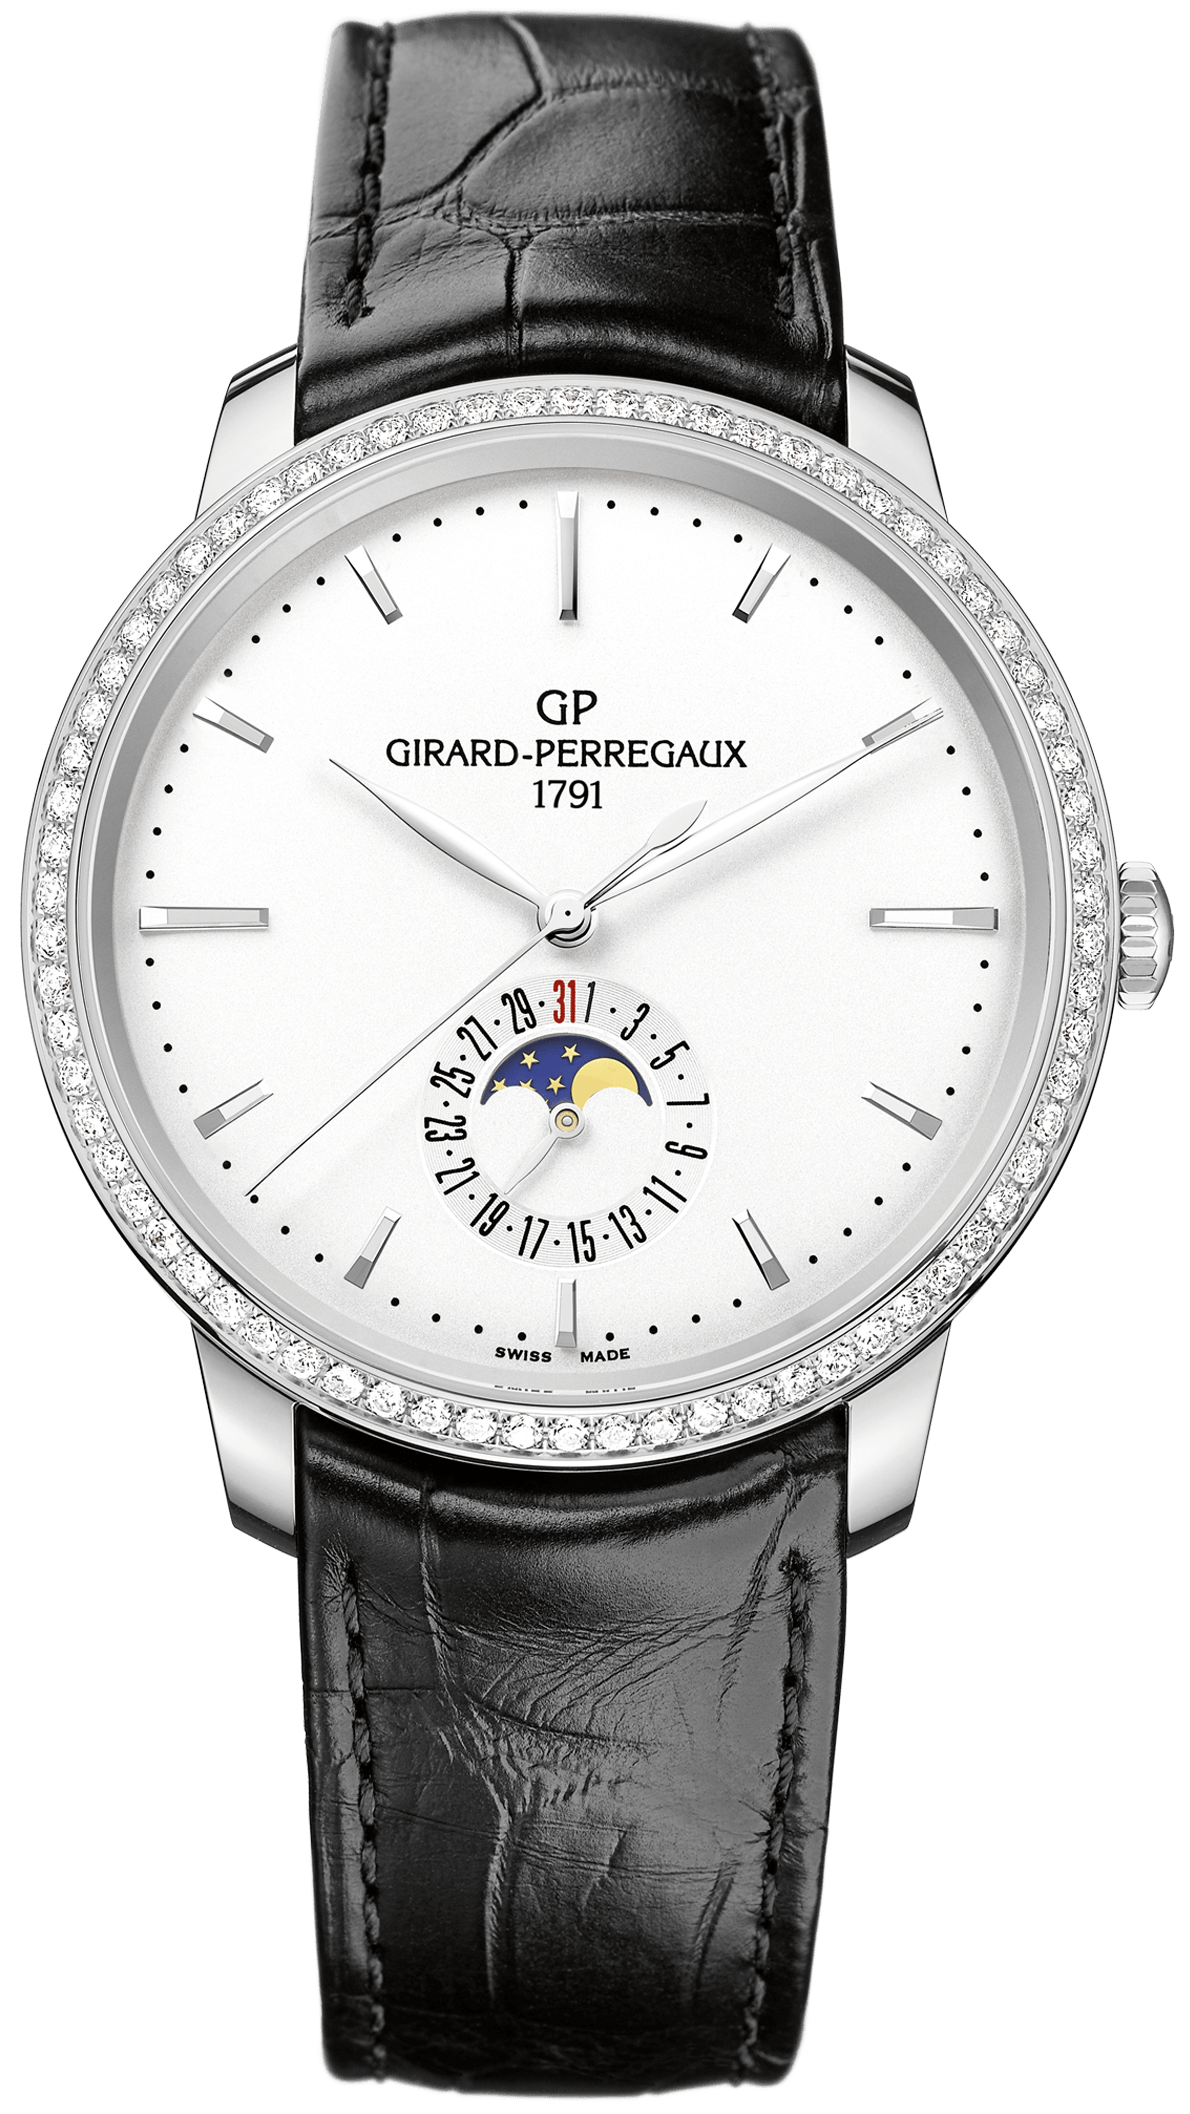 Girard-Perregaux 49545D11A131-BB60 (49545d11a131bb60) - 1966 Date And Moon Phases